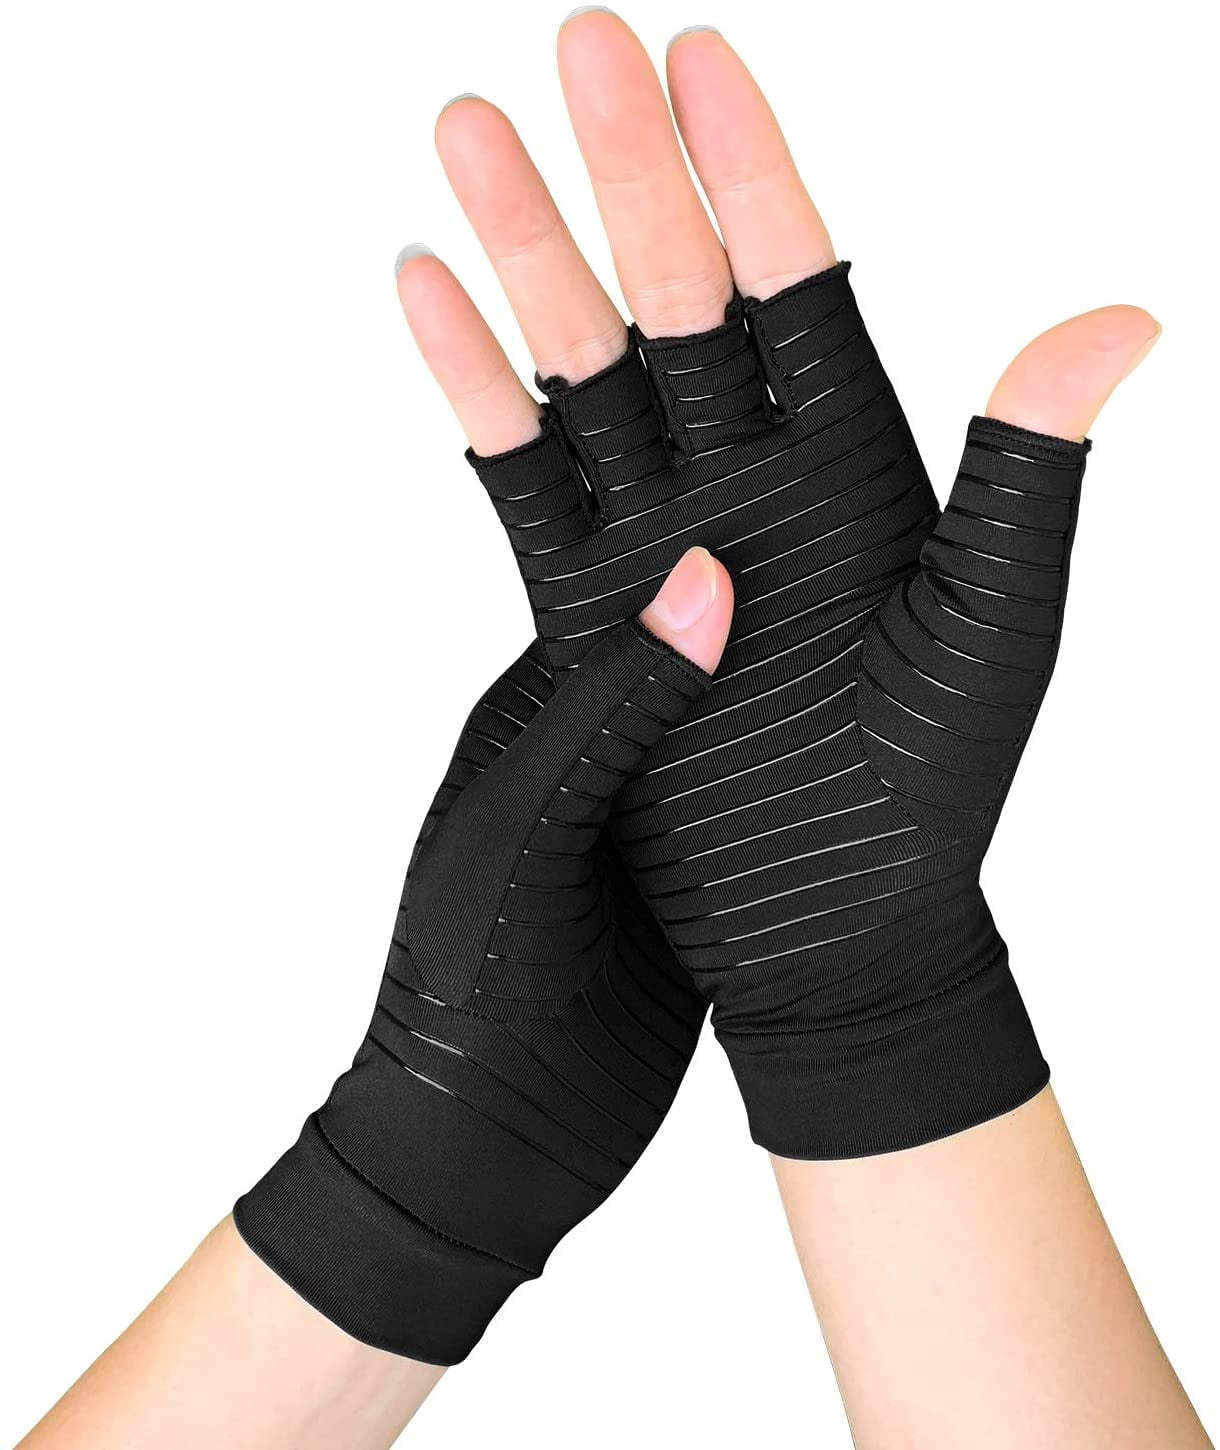 Medium Right Edema Arthritis Compression Swelling Glove Carpal Tunnel Joint Pain 